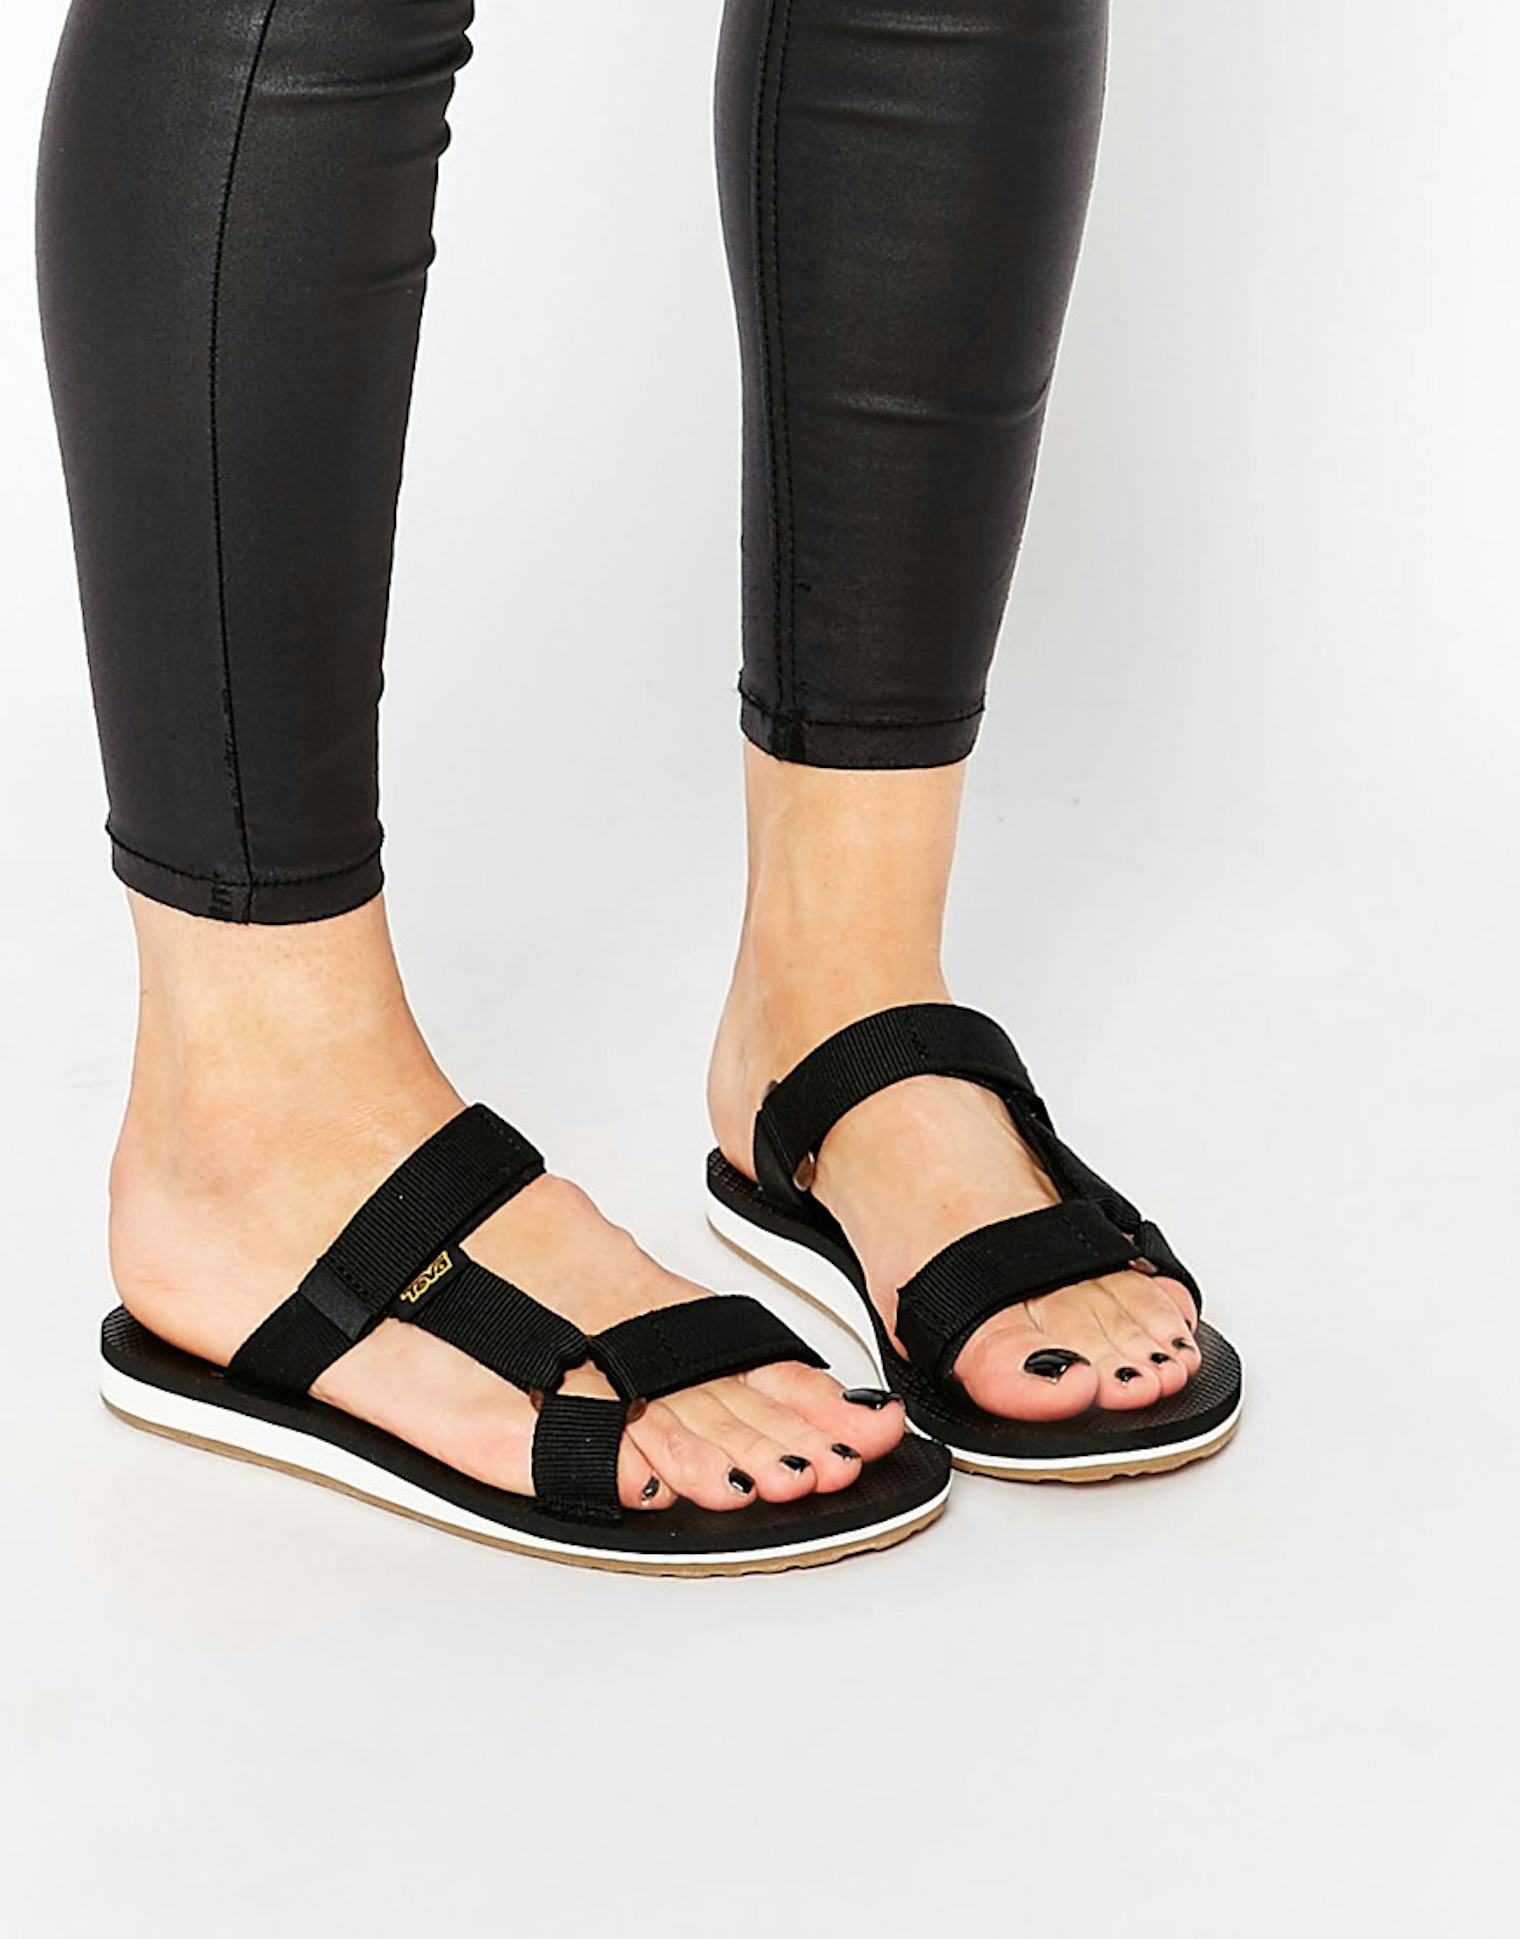 Slide On Sandals You Can Wear Anywhere